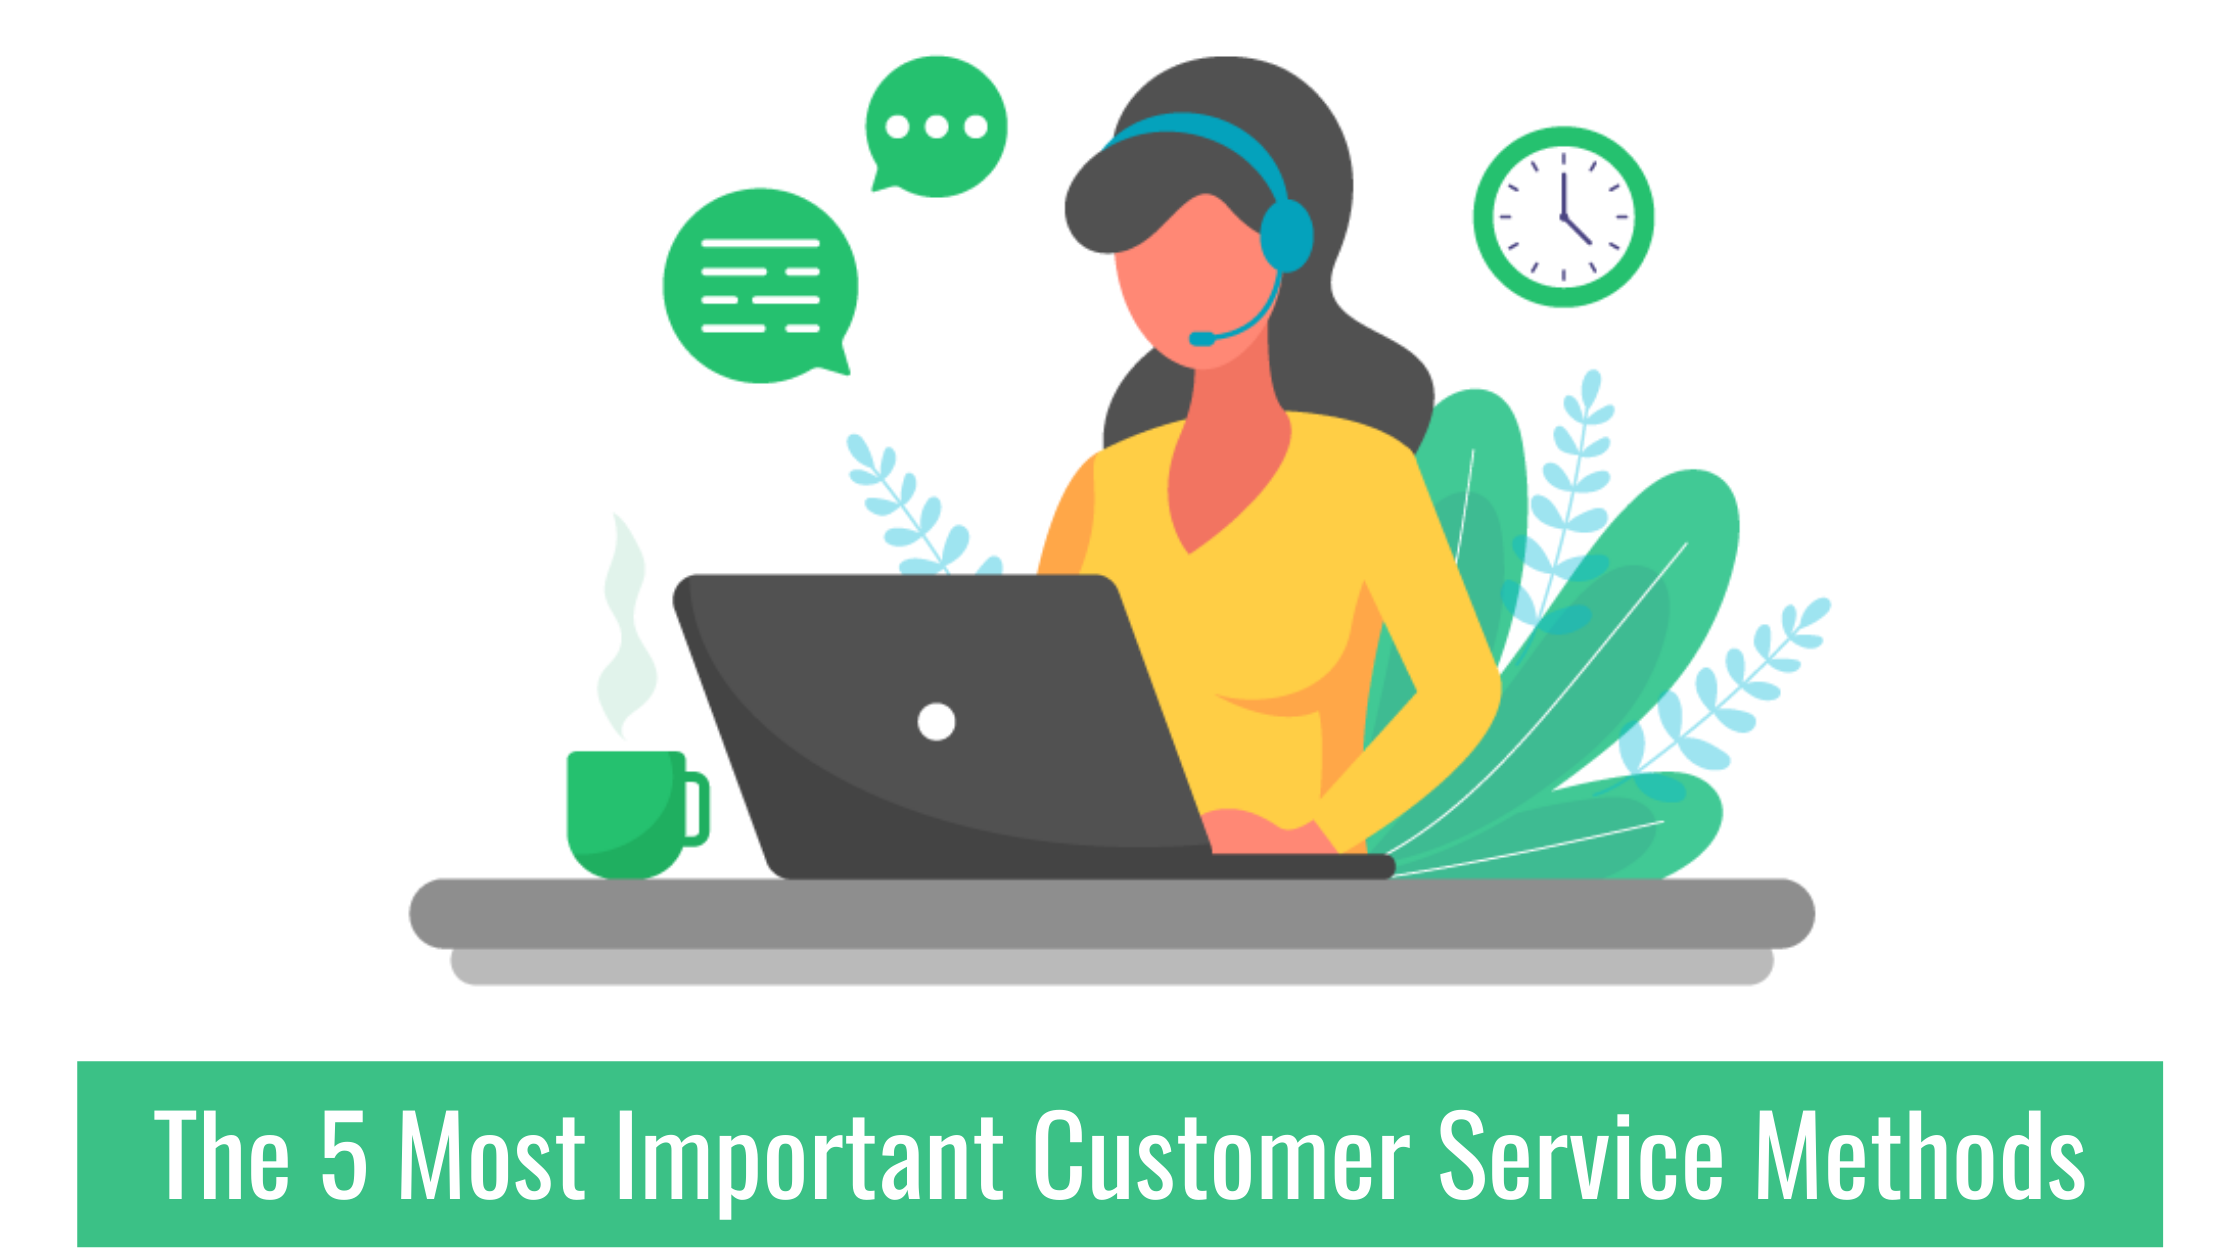 The 5 Most Important Customer Service Methods